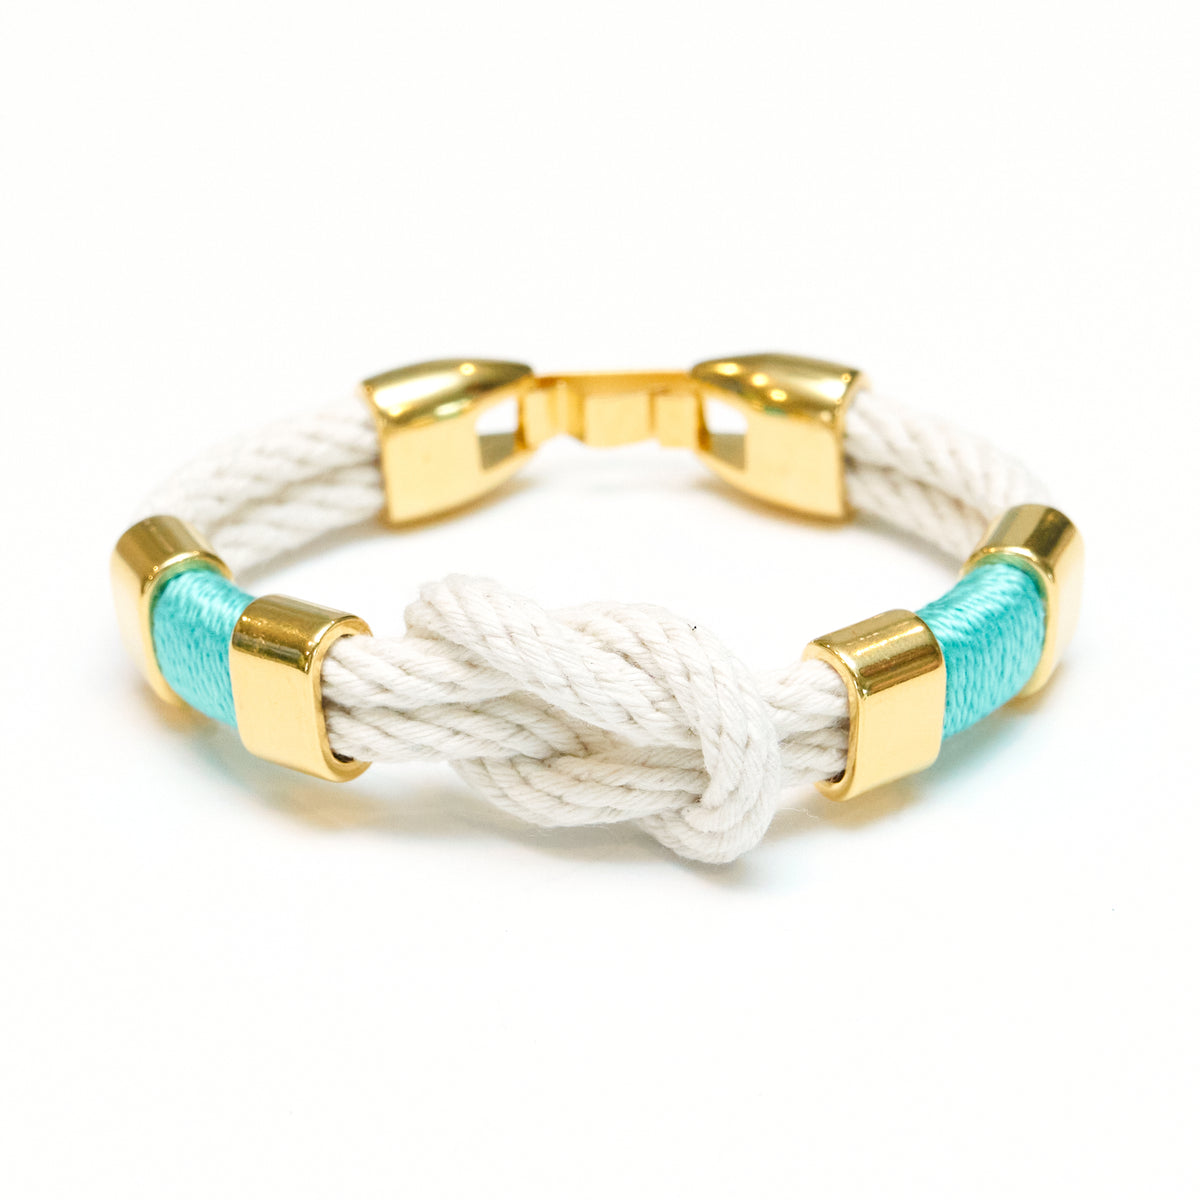 Starboard - Ivory/Turquoise/Gold